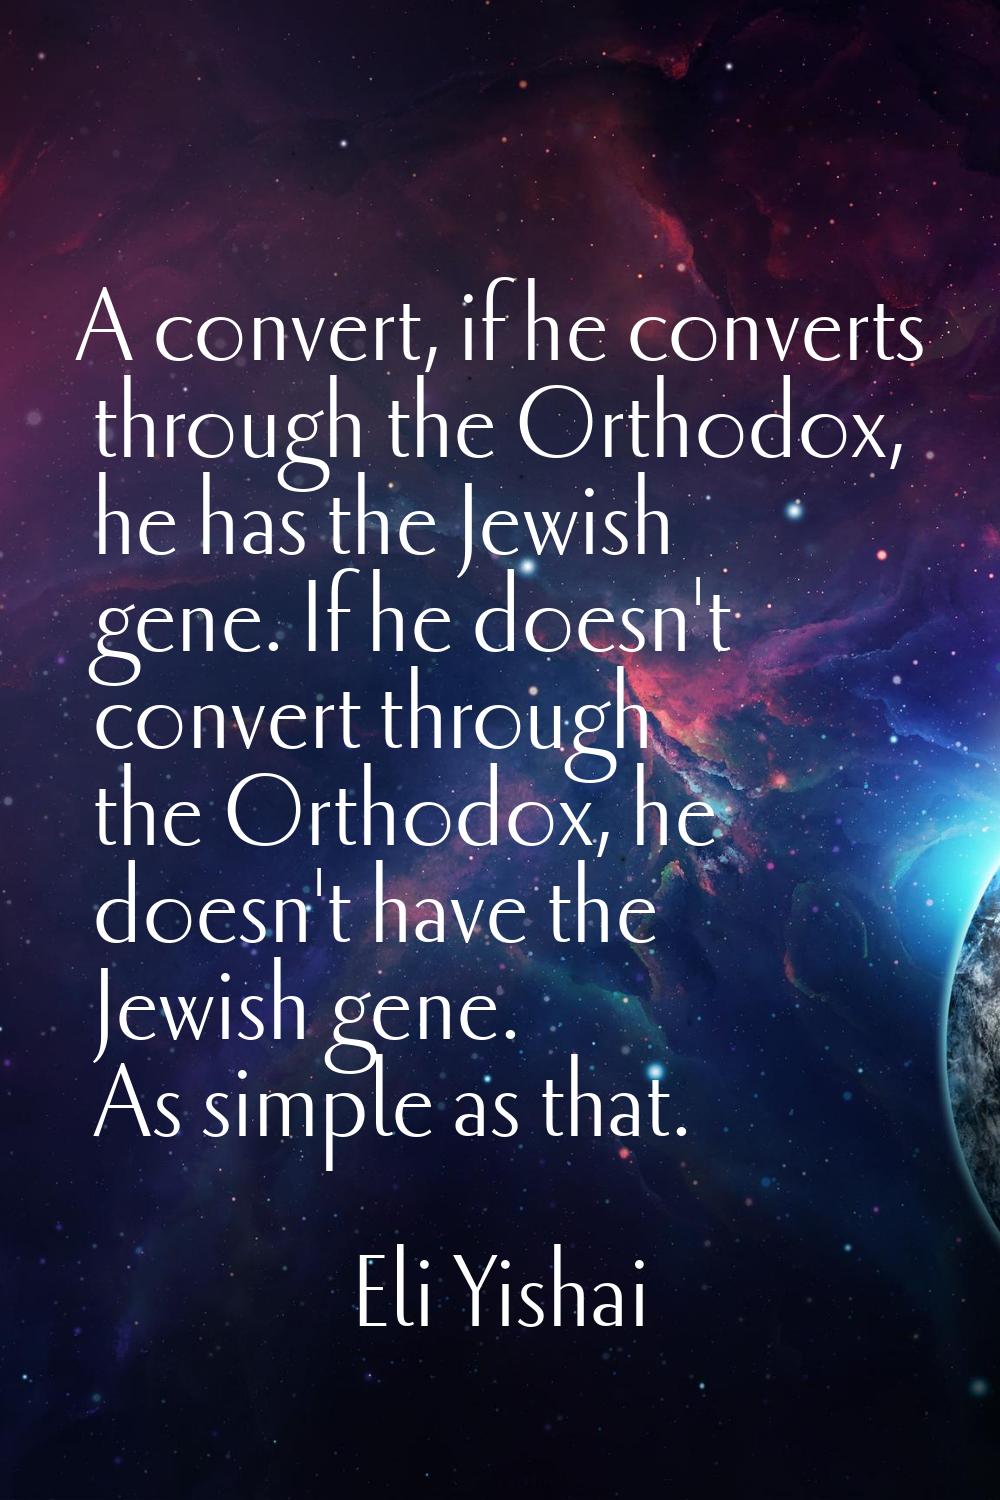 A convert, if he converts through the Orthodox, he has the Jewish gene. If he doesn't convert throu